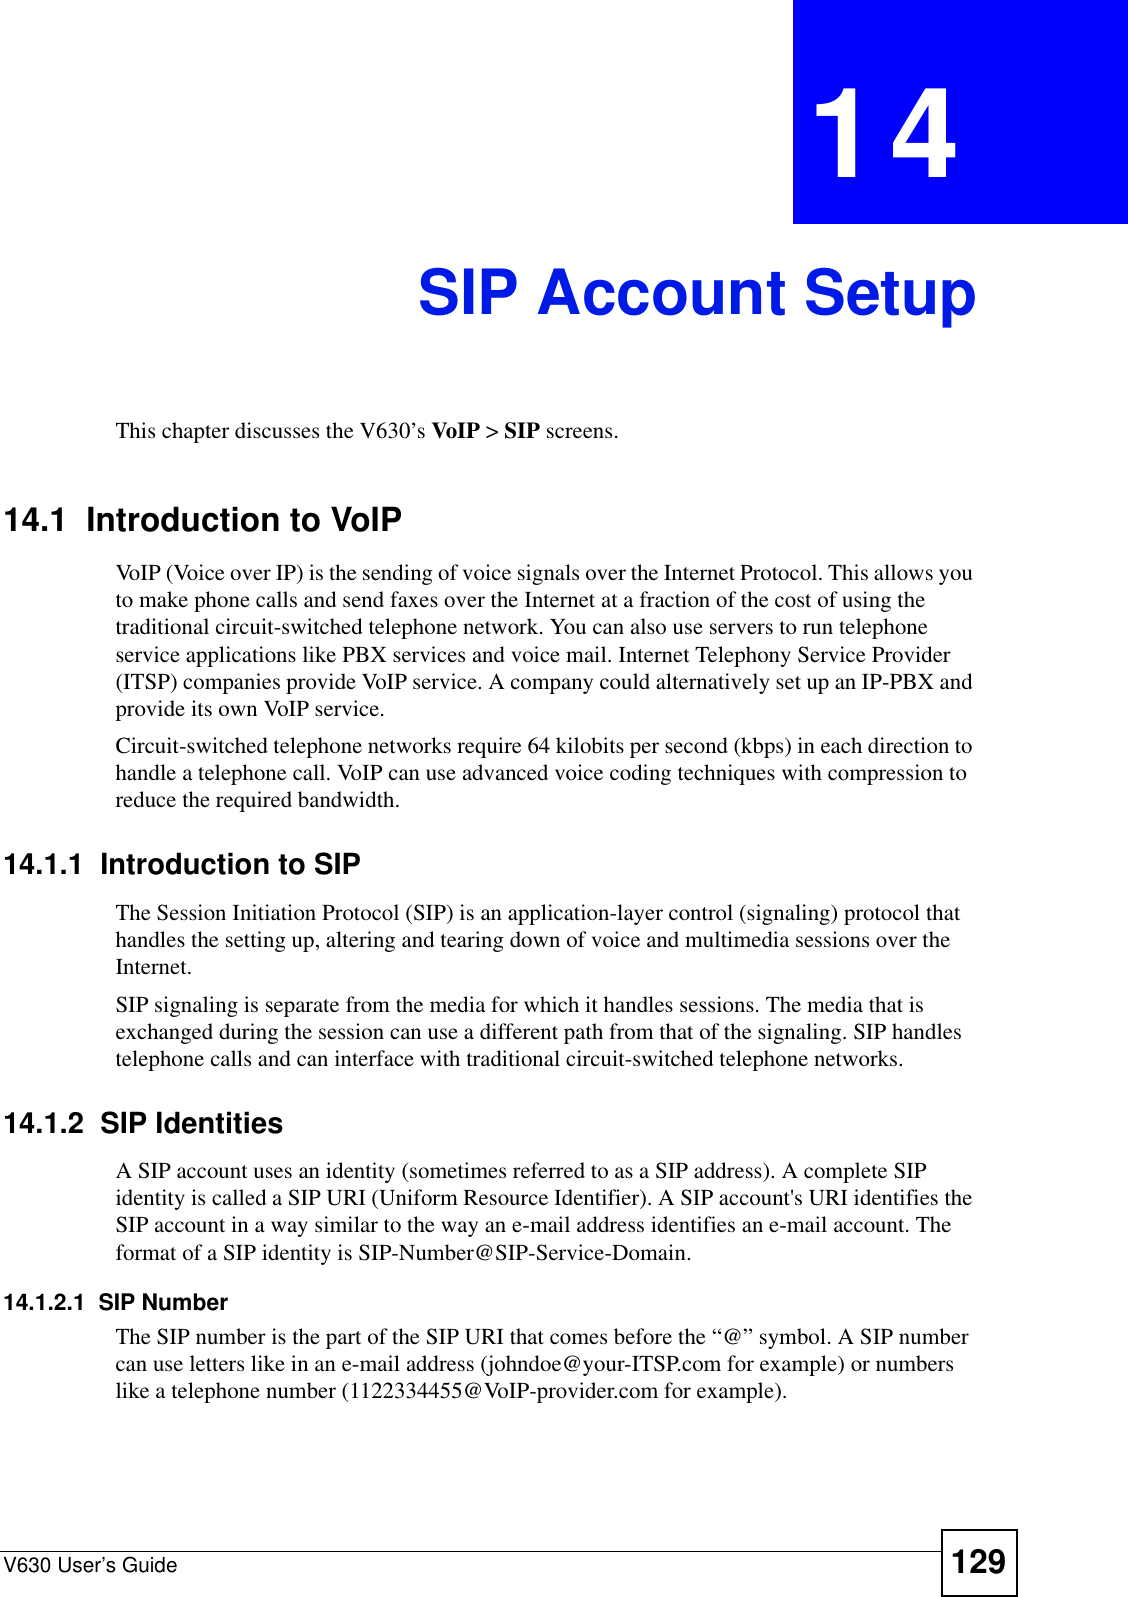 V630 User’s Guide 129CHAPTER  14 SIP Account SetupThis chapter discusses the V630’s VoIP &gt; SIP screens.14.1  Introduction to VoIPVoIP (Voice over IP) is the sending of voice signals over the Internet Protocol. This allows you to make phone calls and send faxes over the Internet at a fraction of the cost of using the traditional circuit-switched telephone network. You can also use servers to run telephone service applications like PBX services and voice mail. Internet Telephony Service Provider (ITSP) companies provide VoIP service. A company could alternatively set up an IP-PBX and provide its own VoIP service.Circuit-switched telephone networks require 64 kilobits per second (kbps) in each direction to handle a telephone call. VoIP can use advanced voice coding techniques with compression to reduce the required bandwidth. 14.1.1  Introduction to SIPThe Session Initiation Protocol (SIP) is an application-layer control (signaling) protocol that handles the setting up, altering and tearing down of voice and multimedia sessions over the Internet.SIP signaling is separate from the media for which it handles sessions. The media that is exchanged during the session can use a different path from that of the signaling. SIP handles telephone calls and can interface with traditional circuit-switched telephone networks.14.1.2  SIP IdentitiesA SIP account uses an identity (sometimes referred to as a SIP address). A complete SIP identity is called a SIP URI (Uniform Resource Identifier). A SIP account&apos;s URI identifies the SIP account in a way similar to the way an e-mail address identifies an e-mail account. The format of a SIP identity is SIP-Number@SIP-Service-Domain.14.1.2.1  SIP NumberThe SIP number is the part of the SIP URI that comes before the “@” symbol. A SIP number can use letters like in an e-mail address (johndoe@your-ITSP.com for example) or numbers like a telephone number (1122334455@VoIP-provider.com for example).